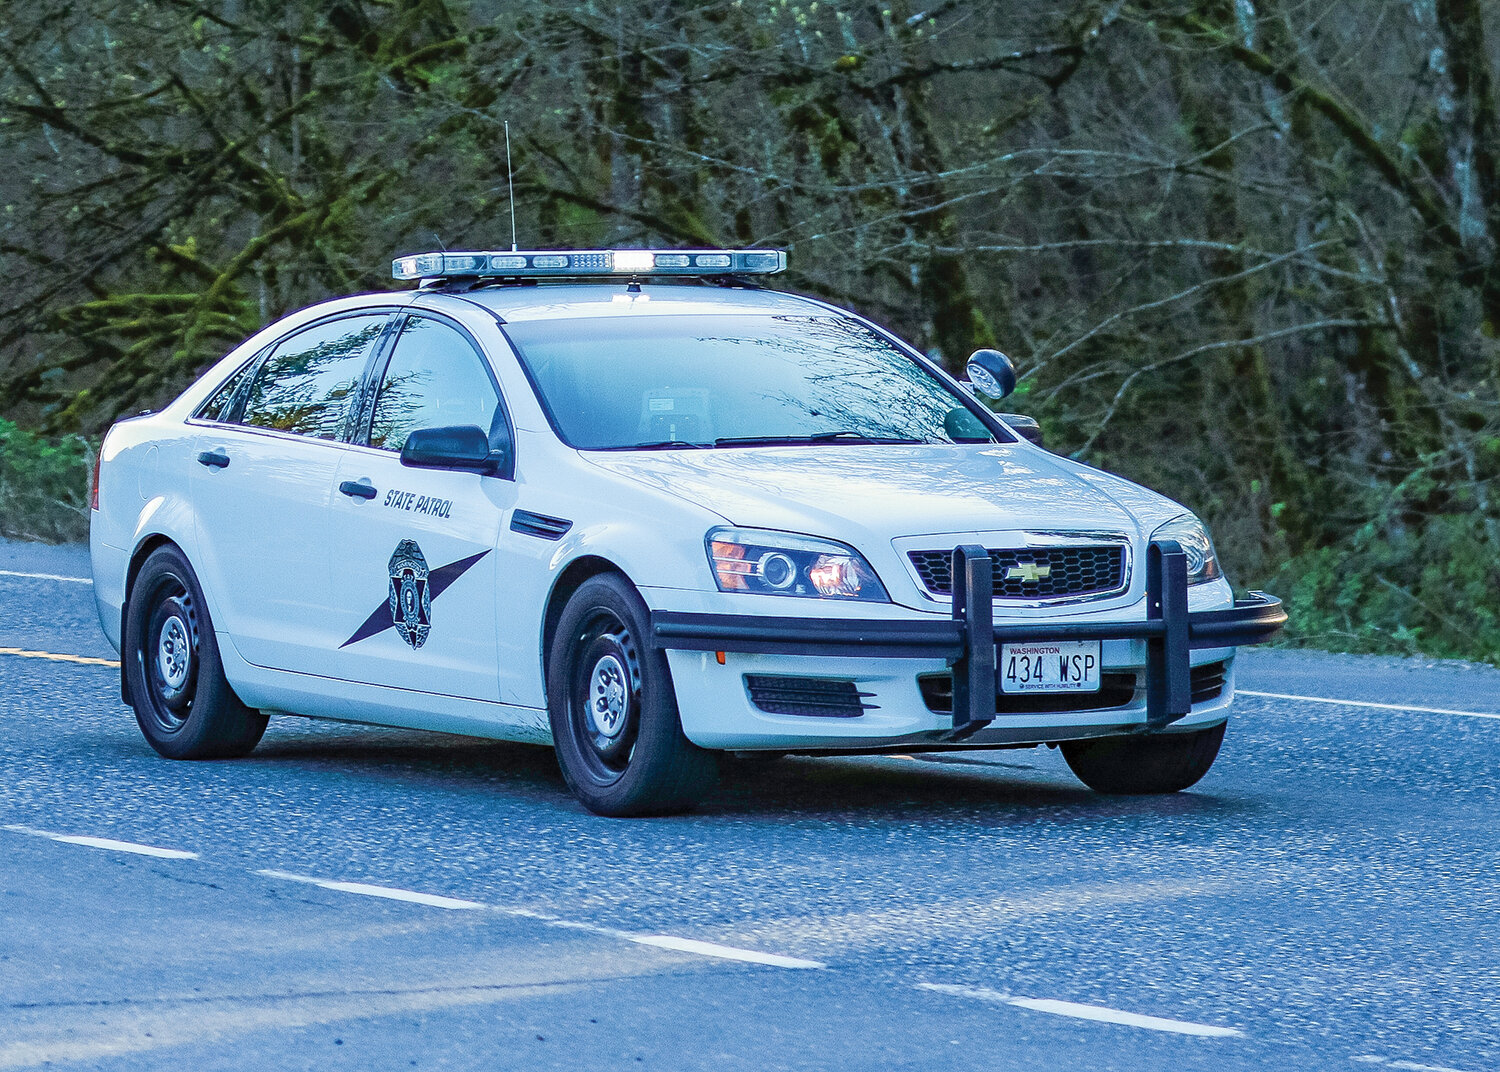 A Washington State Patrol vehicle responds to an incident in this file photo.